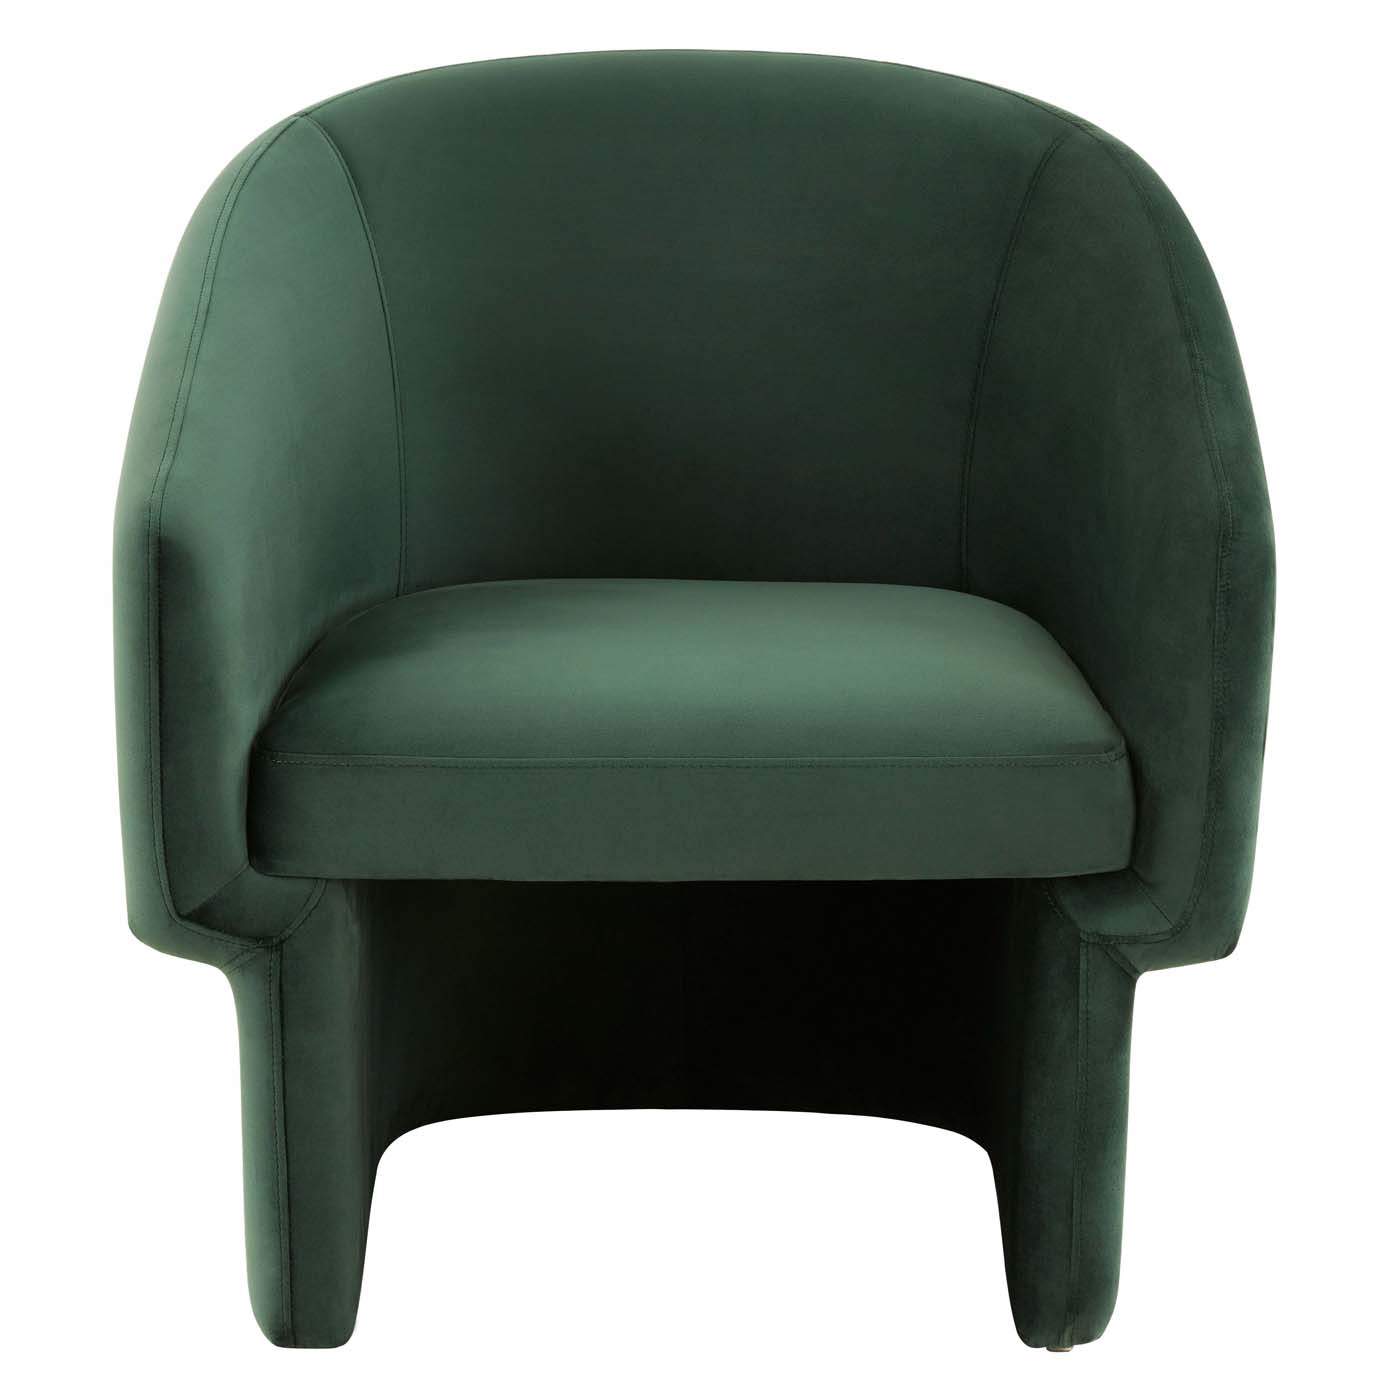 Safavieh Couture Susie Barrel Back Accent Chair